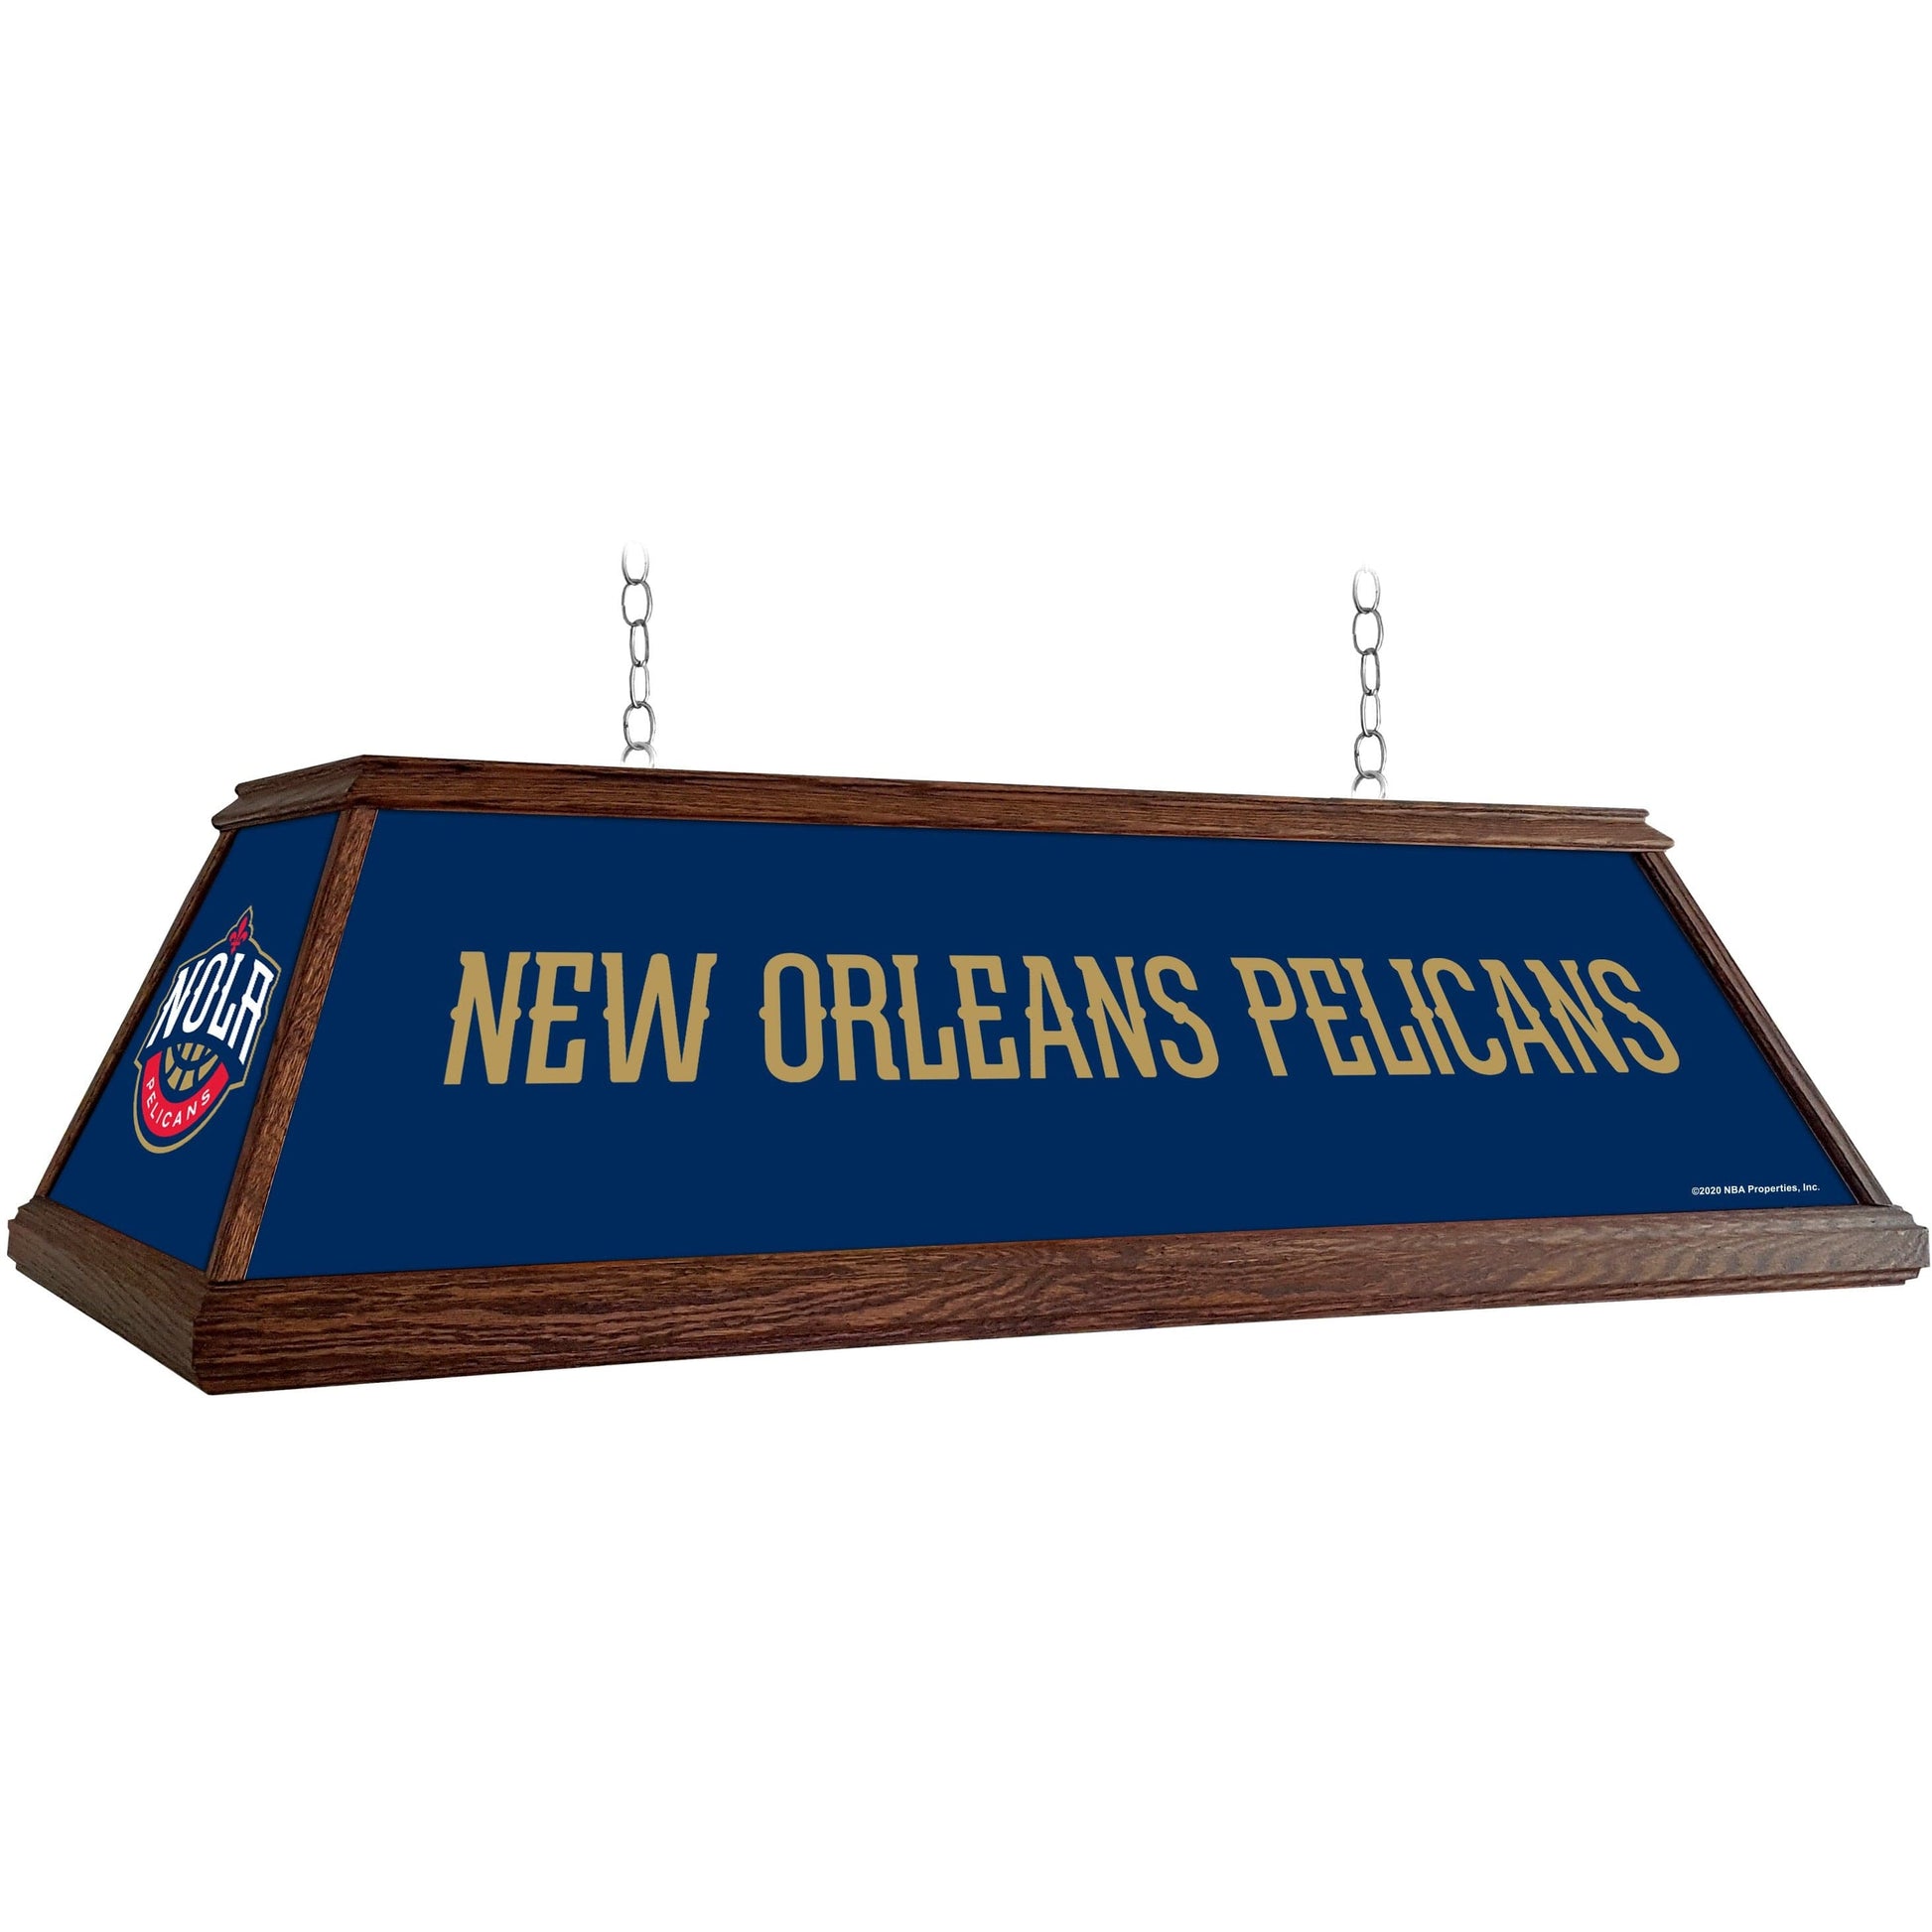 New Orleans Pelicans: Premium Wood Pool Table Light - The Fan-Brand